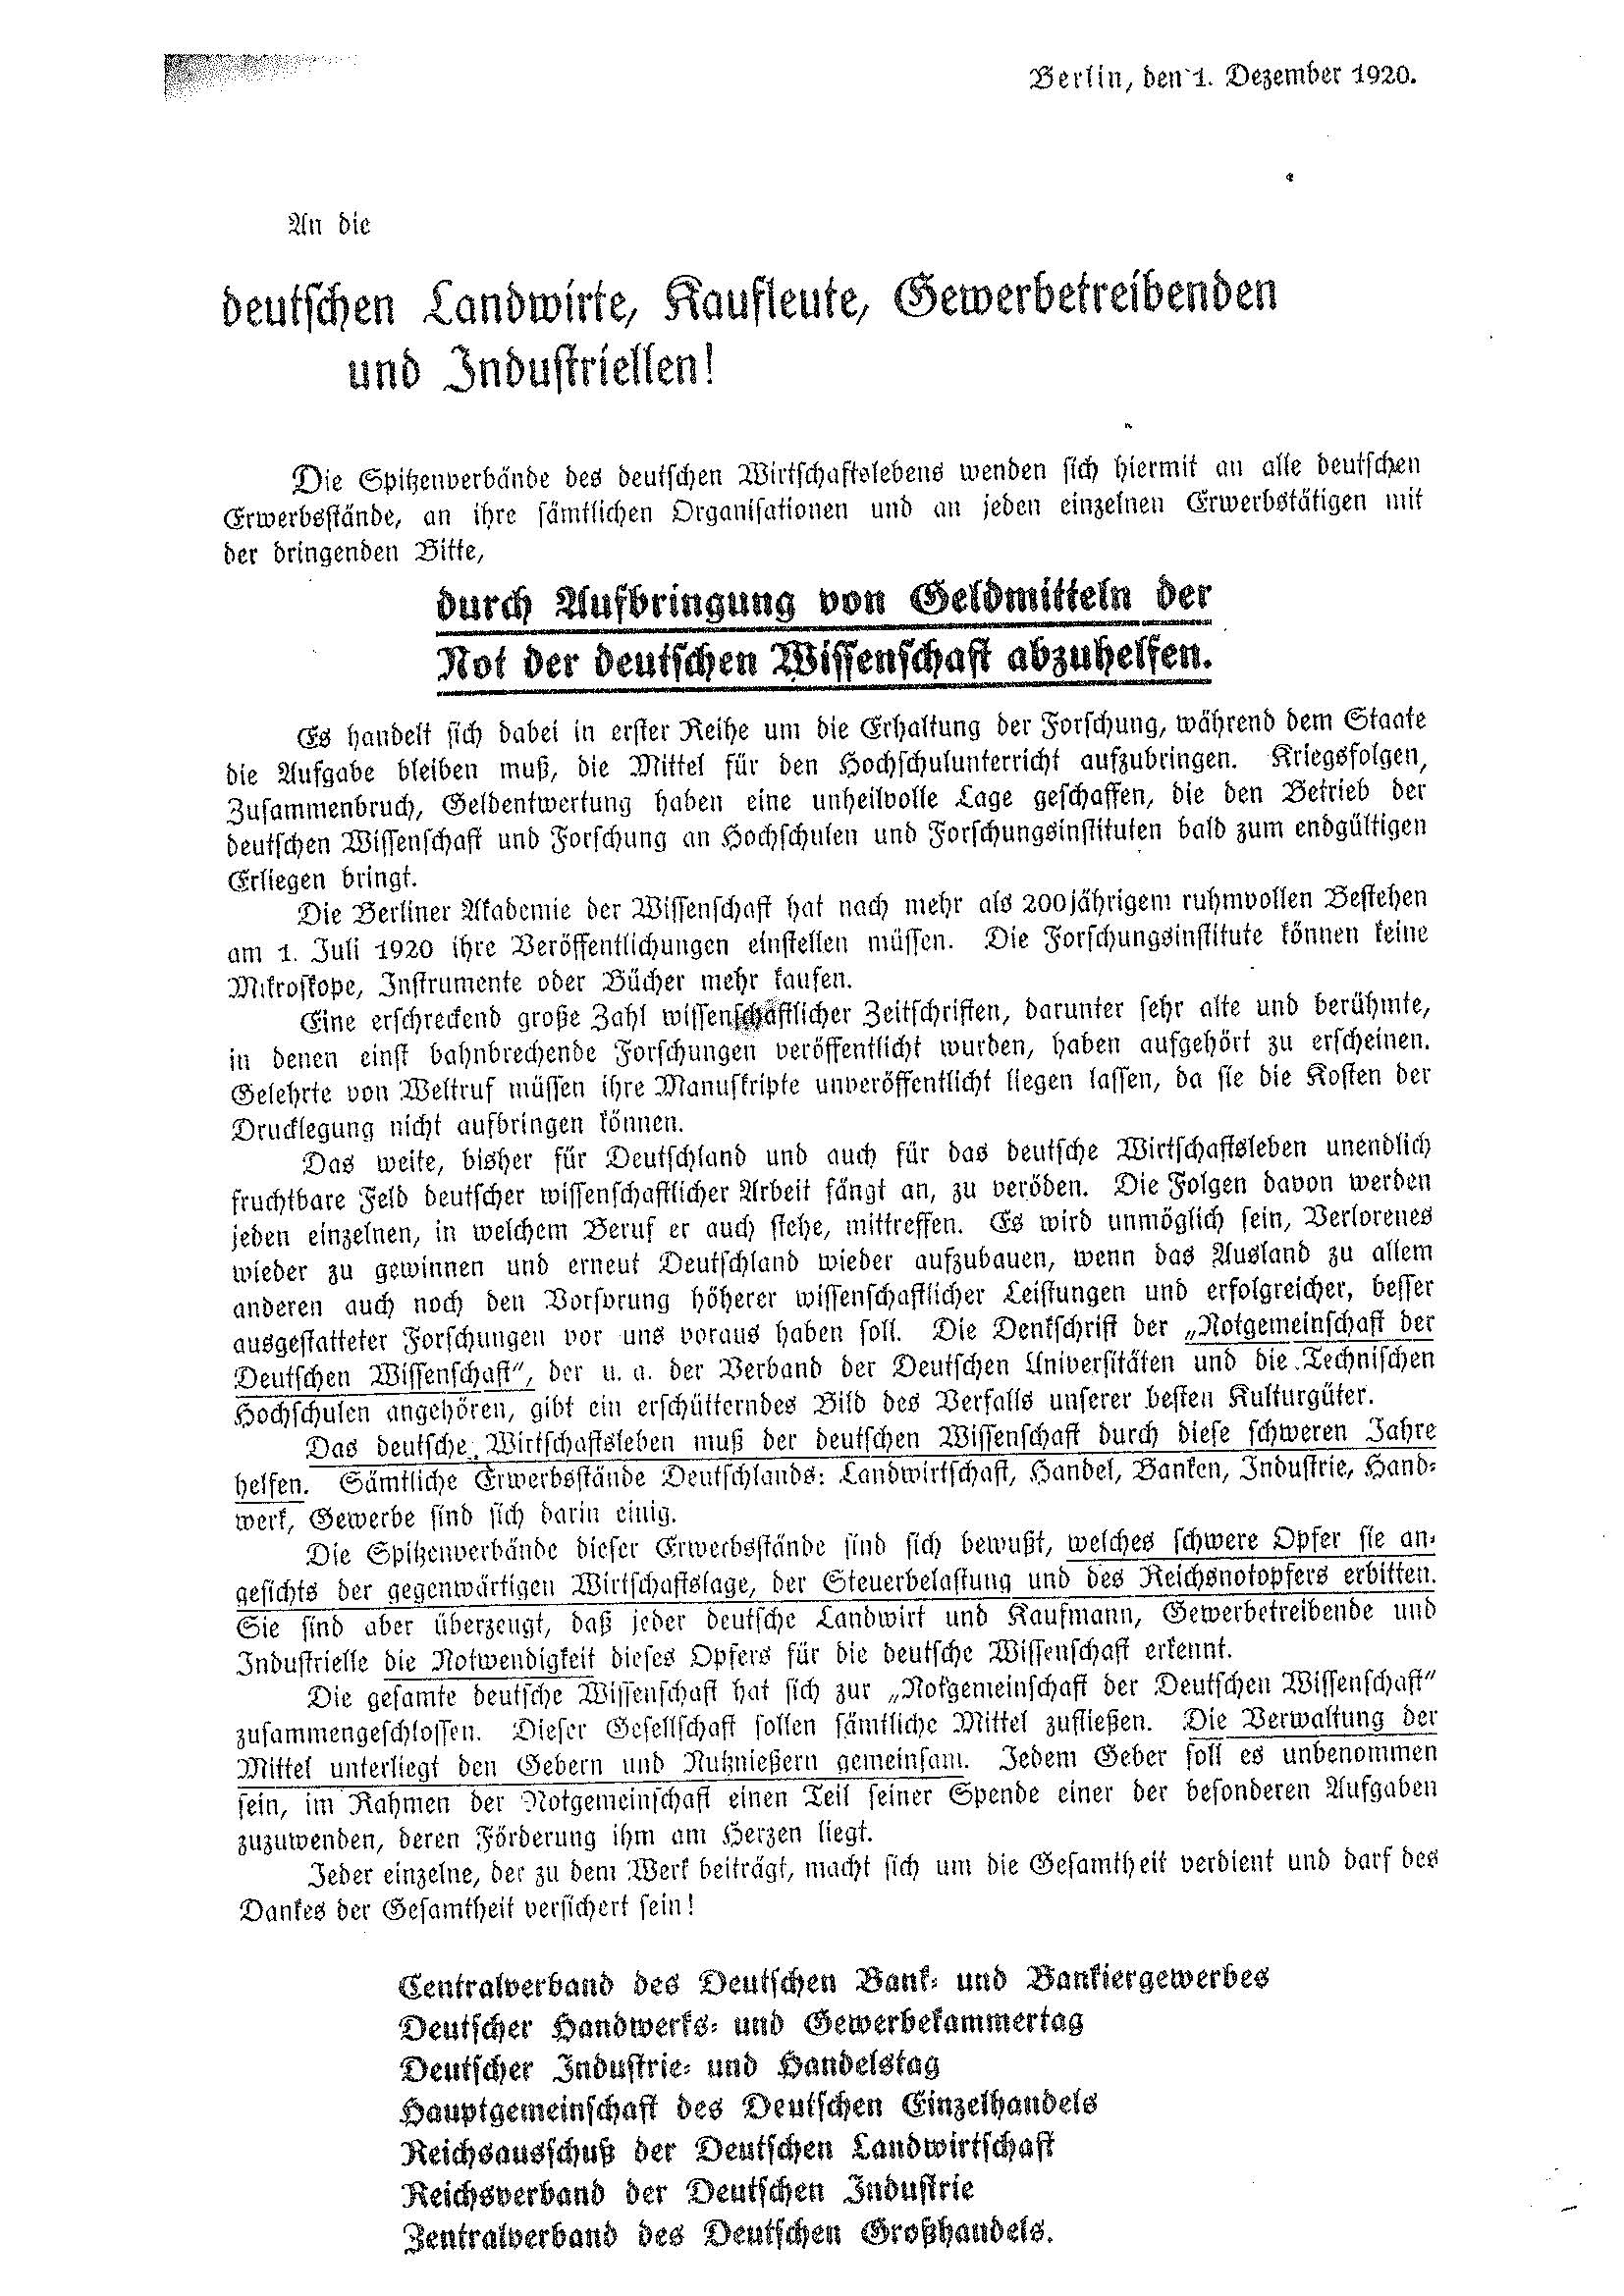 Appeal “To German farmers, merchants, tradespeople and industrialists”, 01/12/1920